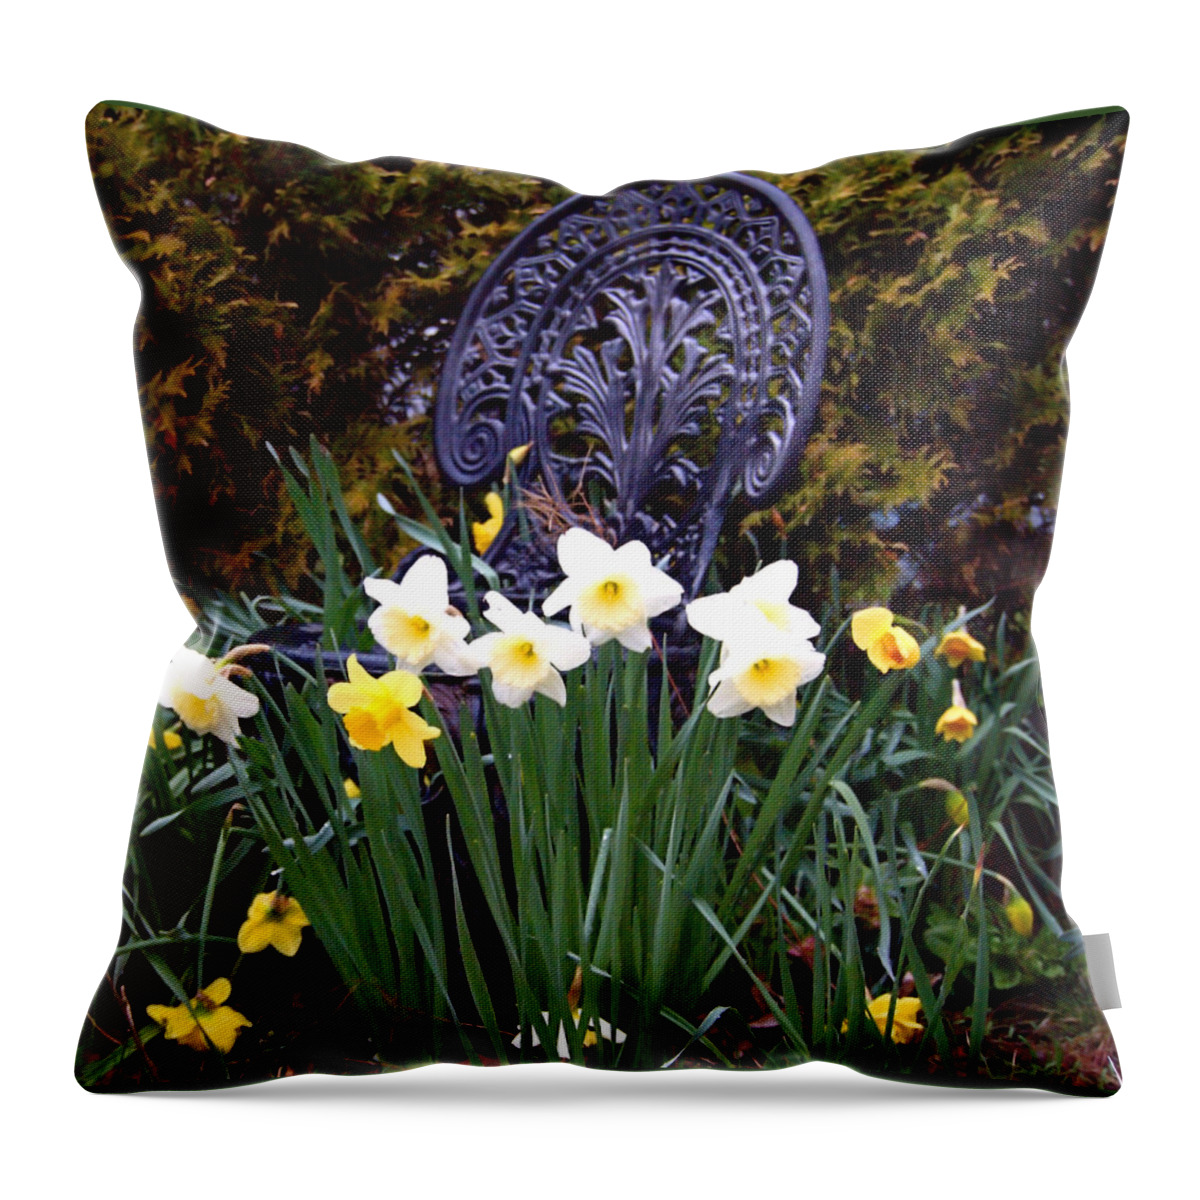 Spring Throw Pillow featuring the photograph Daffodil Garden by Newwwman